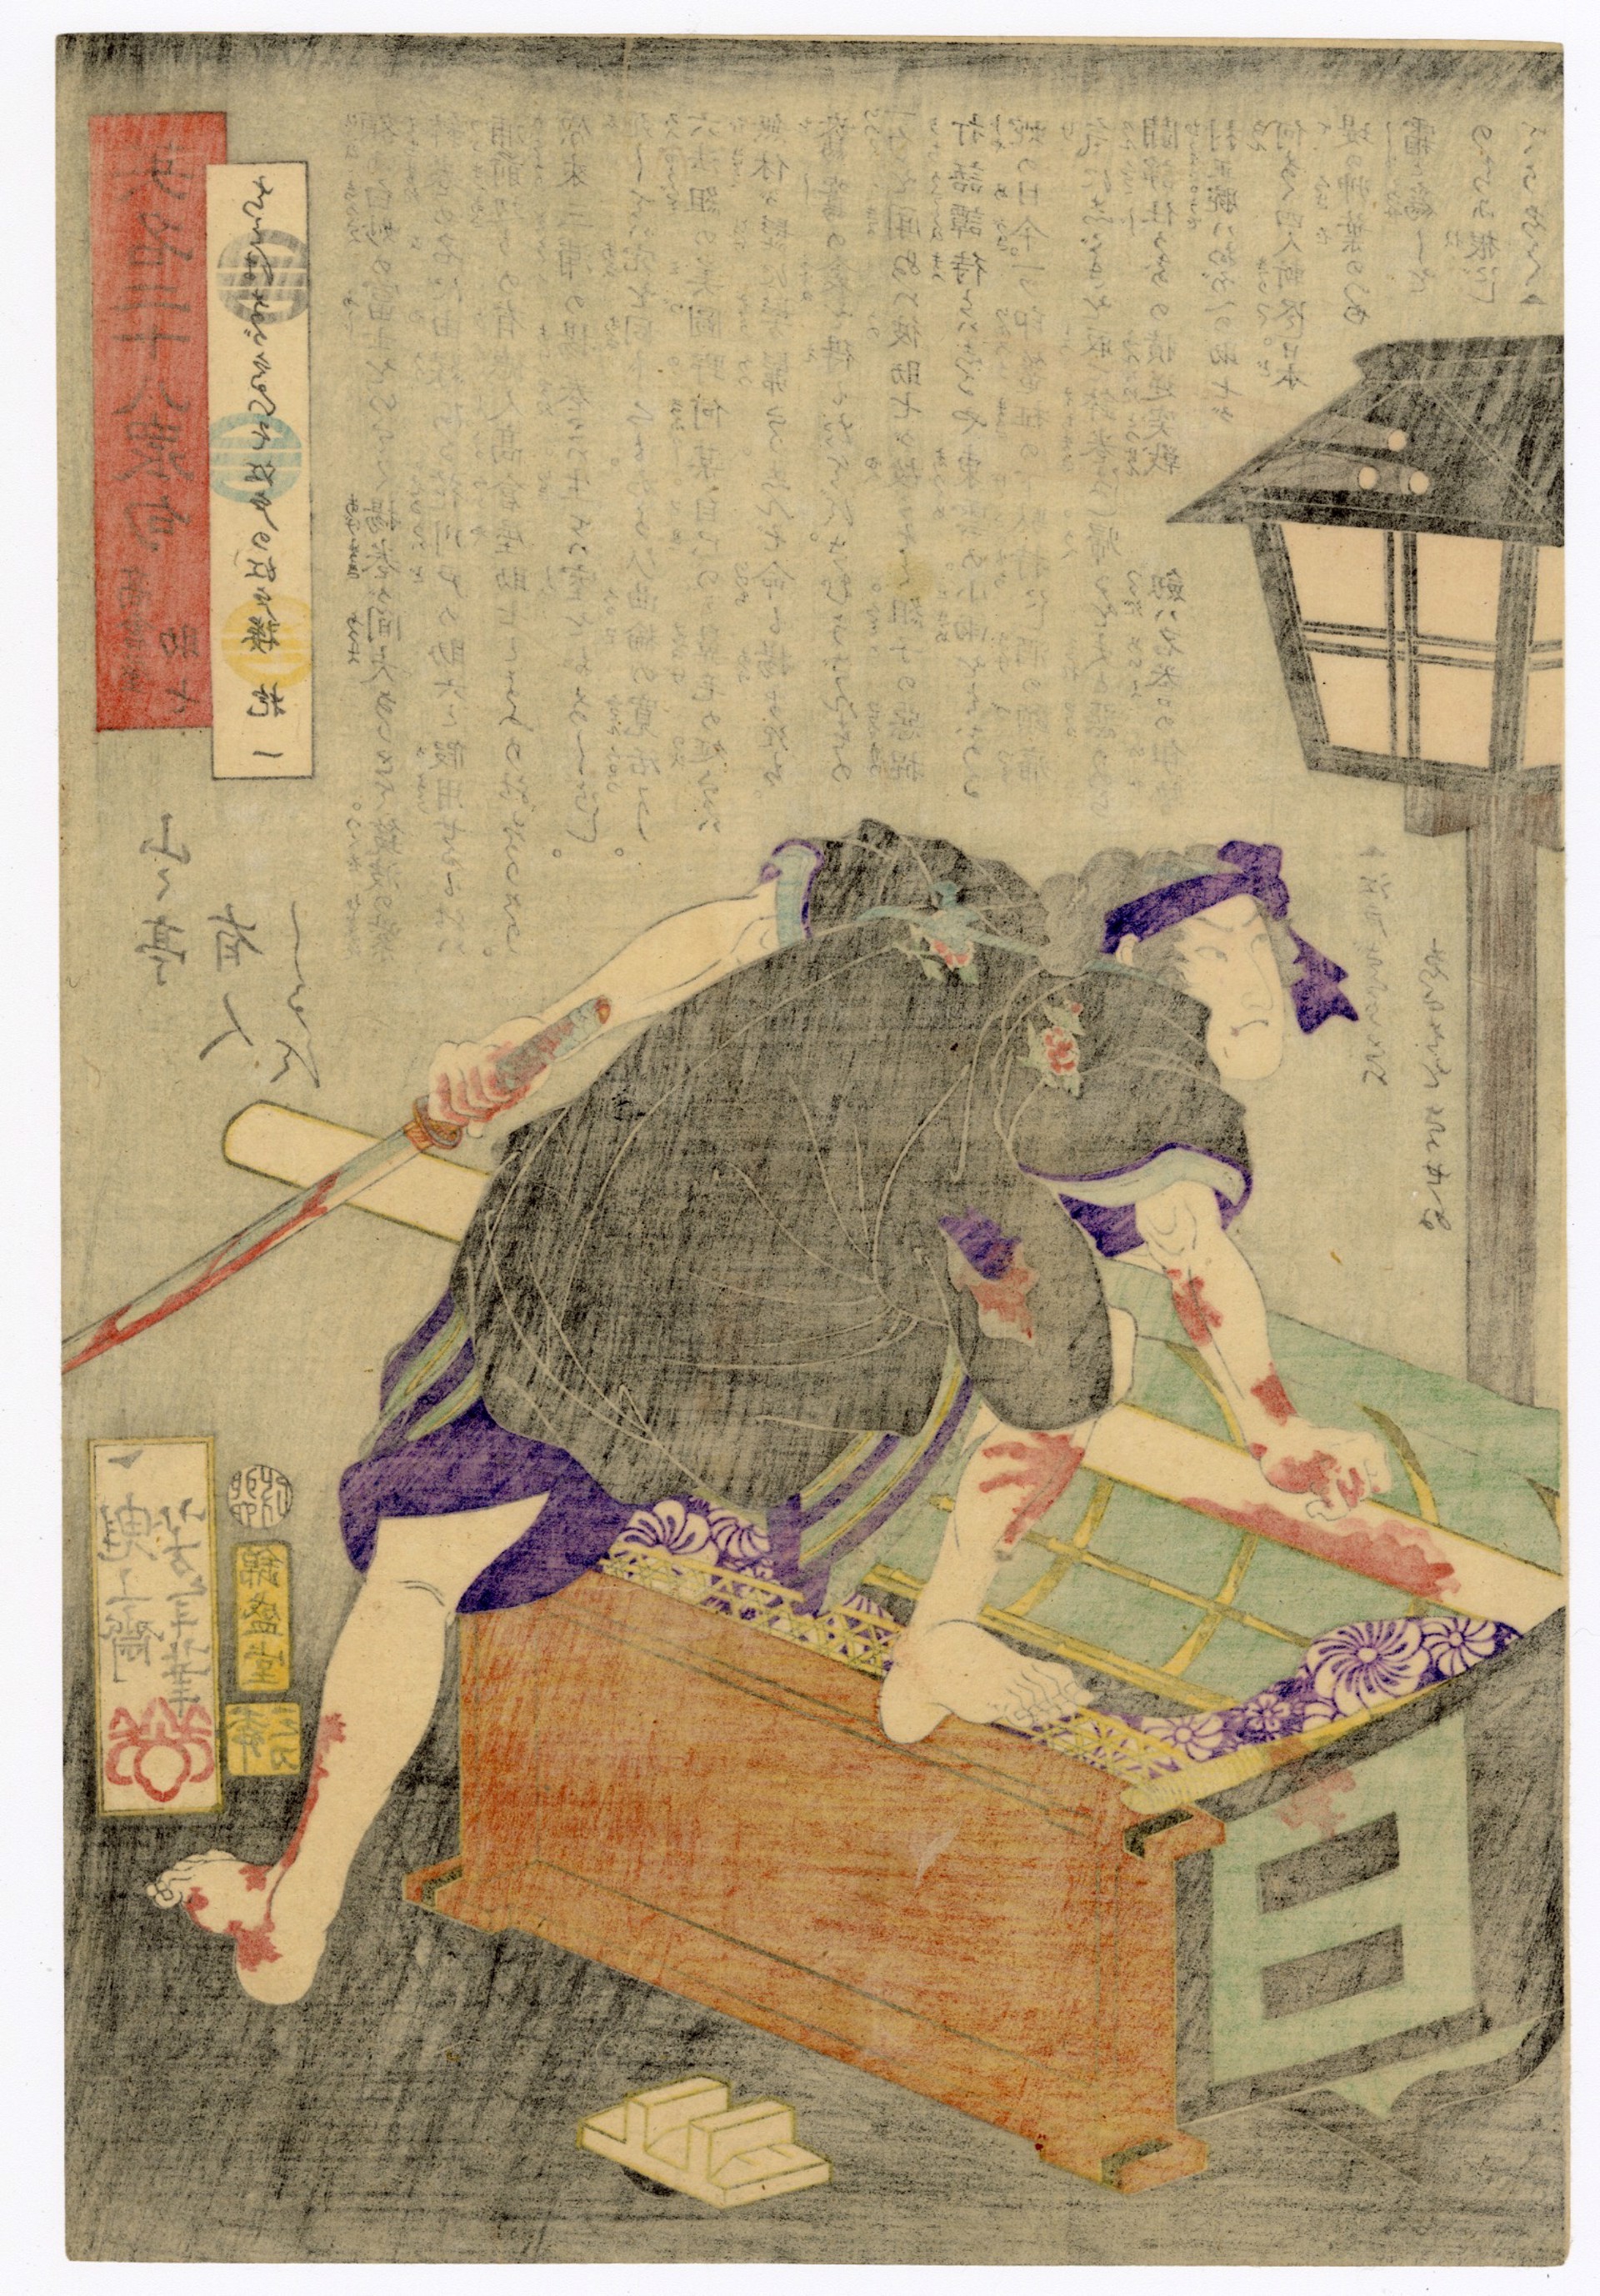 #11 Takakura Sukeshichi, the Outlaw, Standing on an Overturned Palanquin by Yoshitoshi